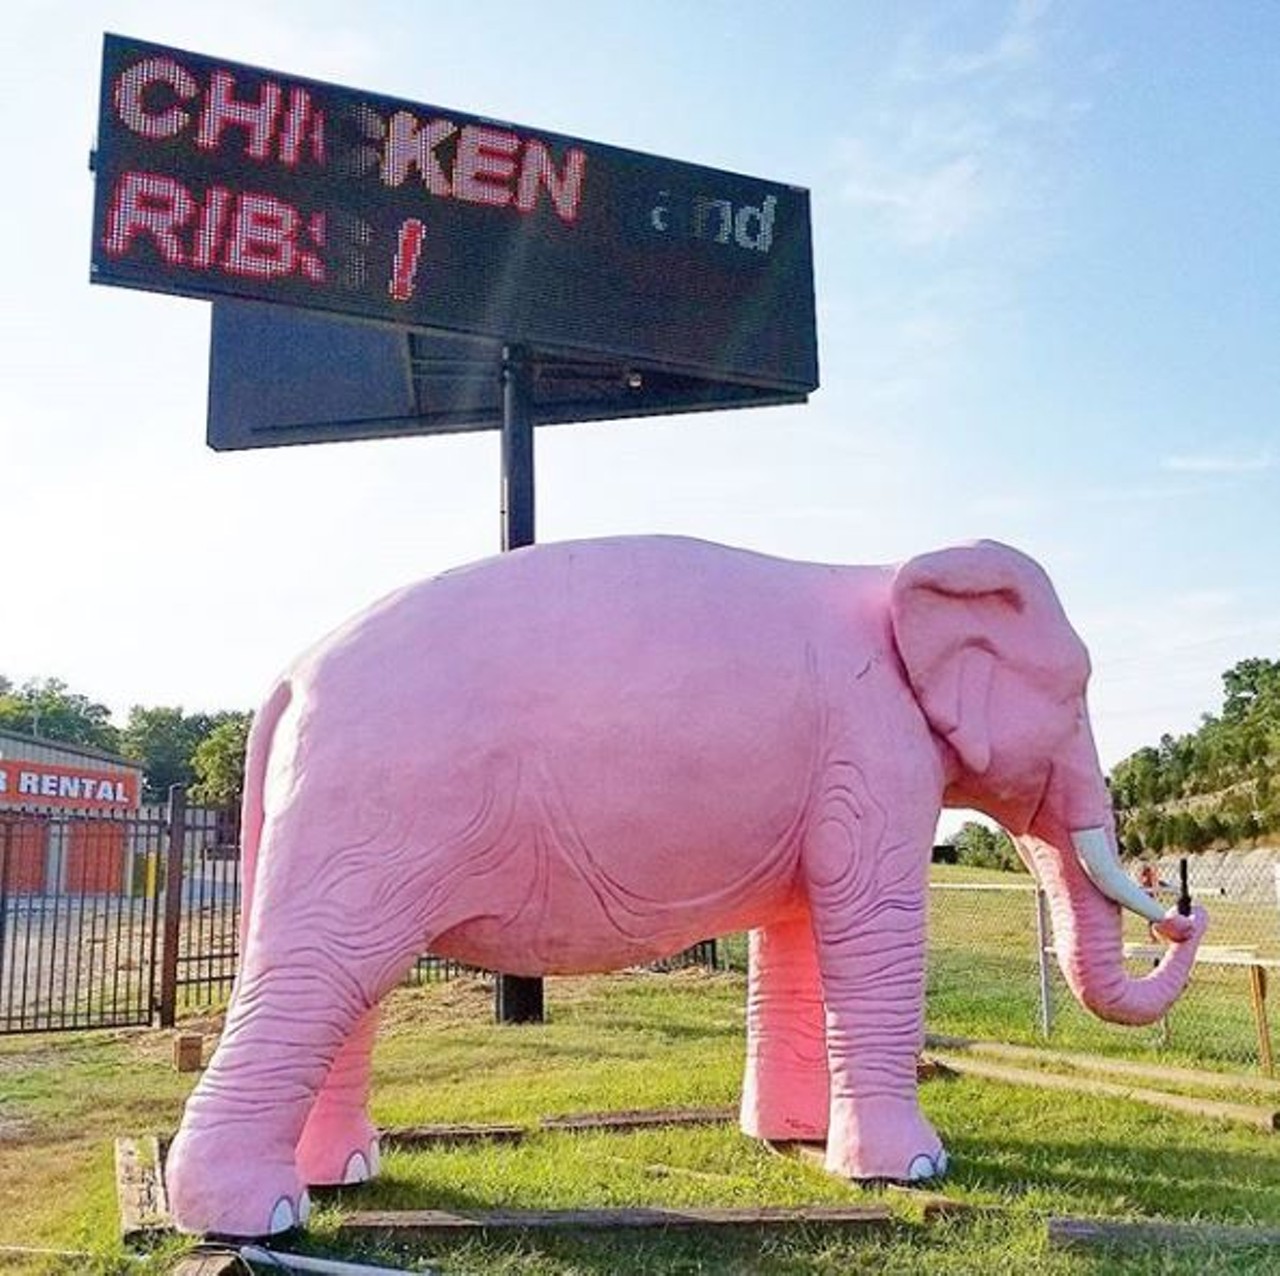 Big Pink Elephant
2599 Missouri 141, Fenton, MO
Want to have a weird photo shoot? Stop off the highway in Fenton and pose with the big pink elephant. She'll give your selfies a surreal quality.
Photo courtesy of jenmariesboutique / Instagram